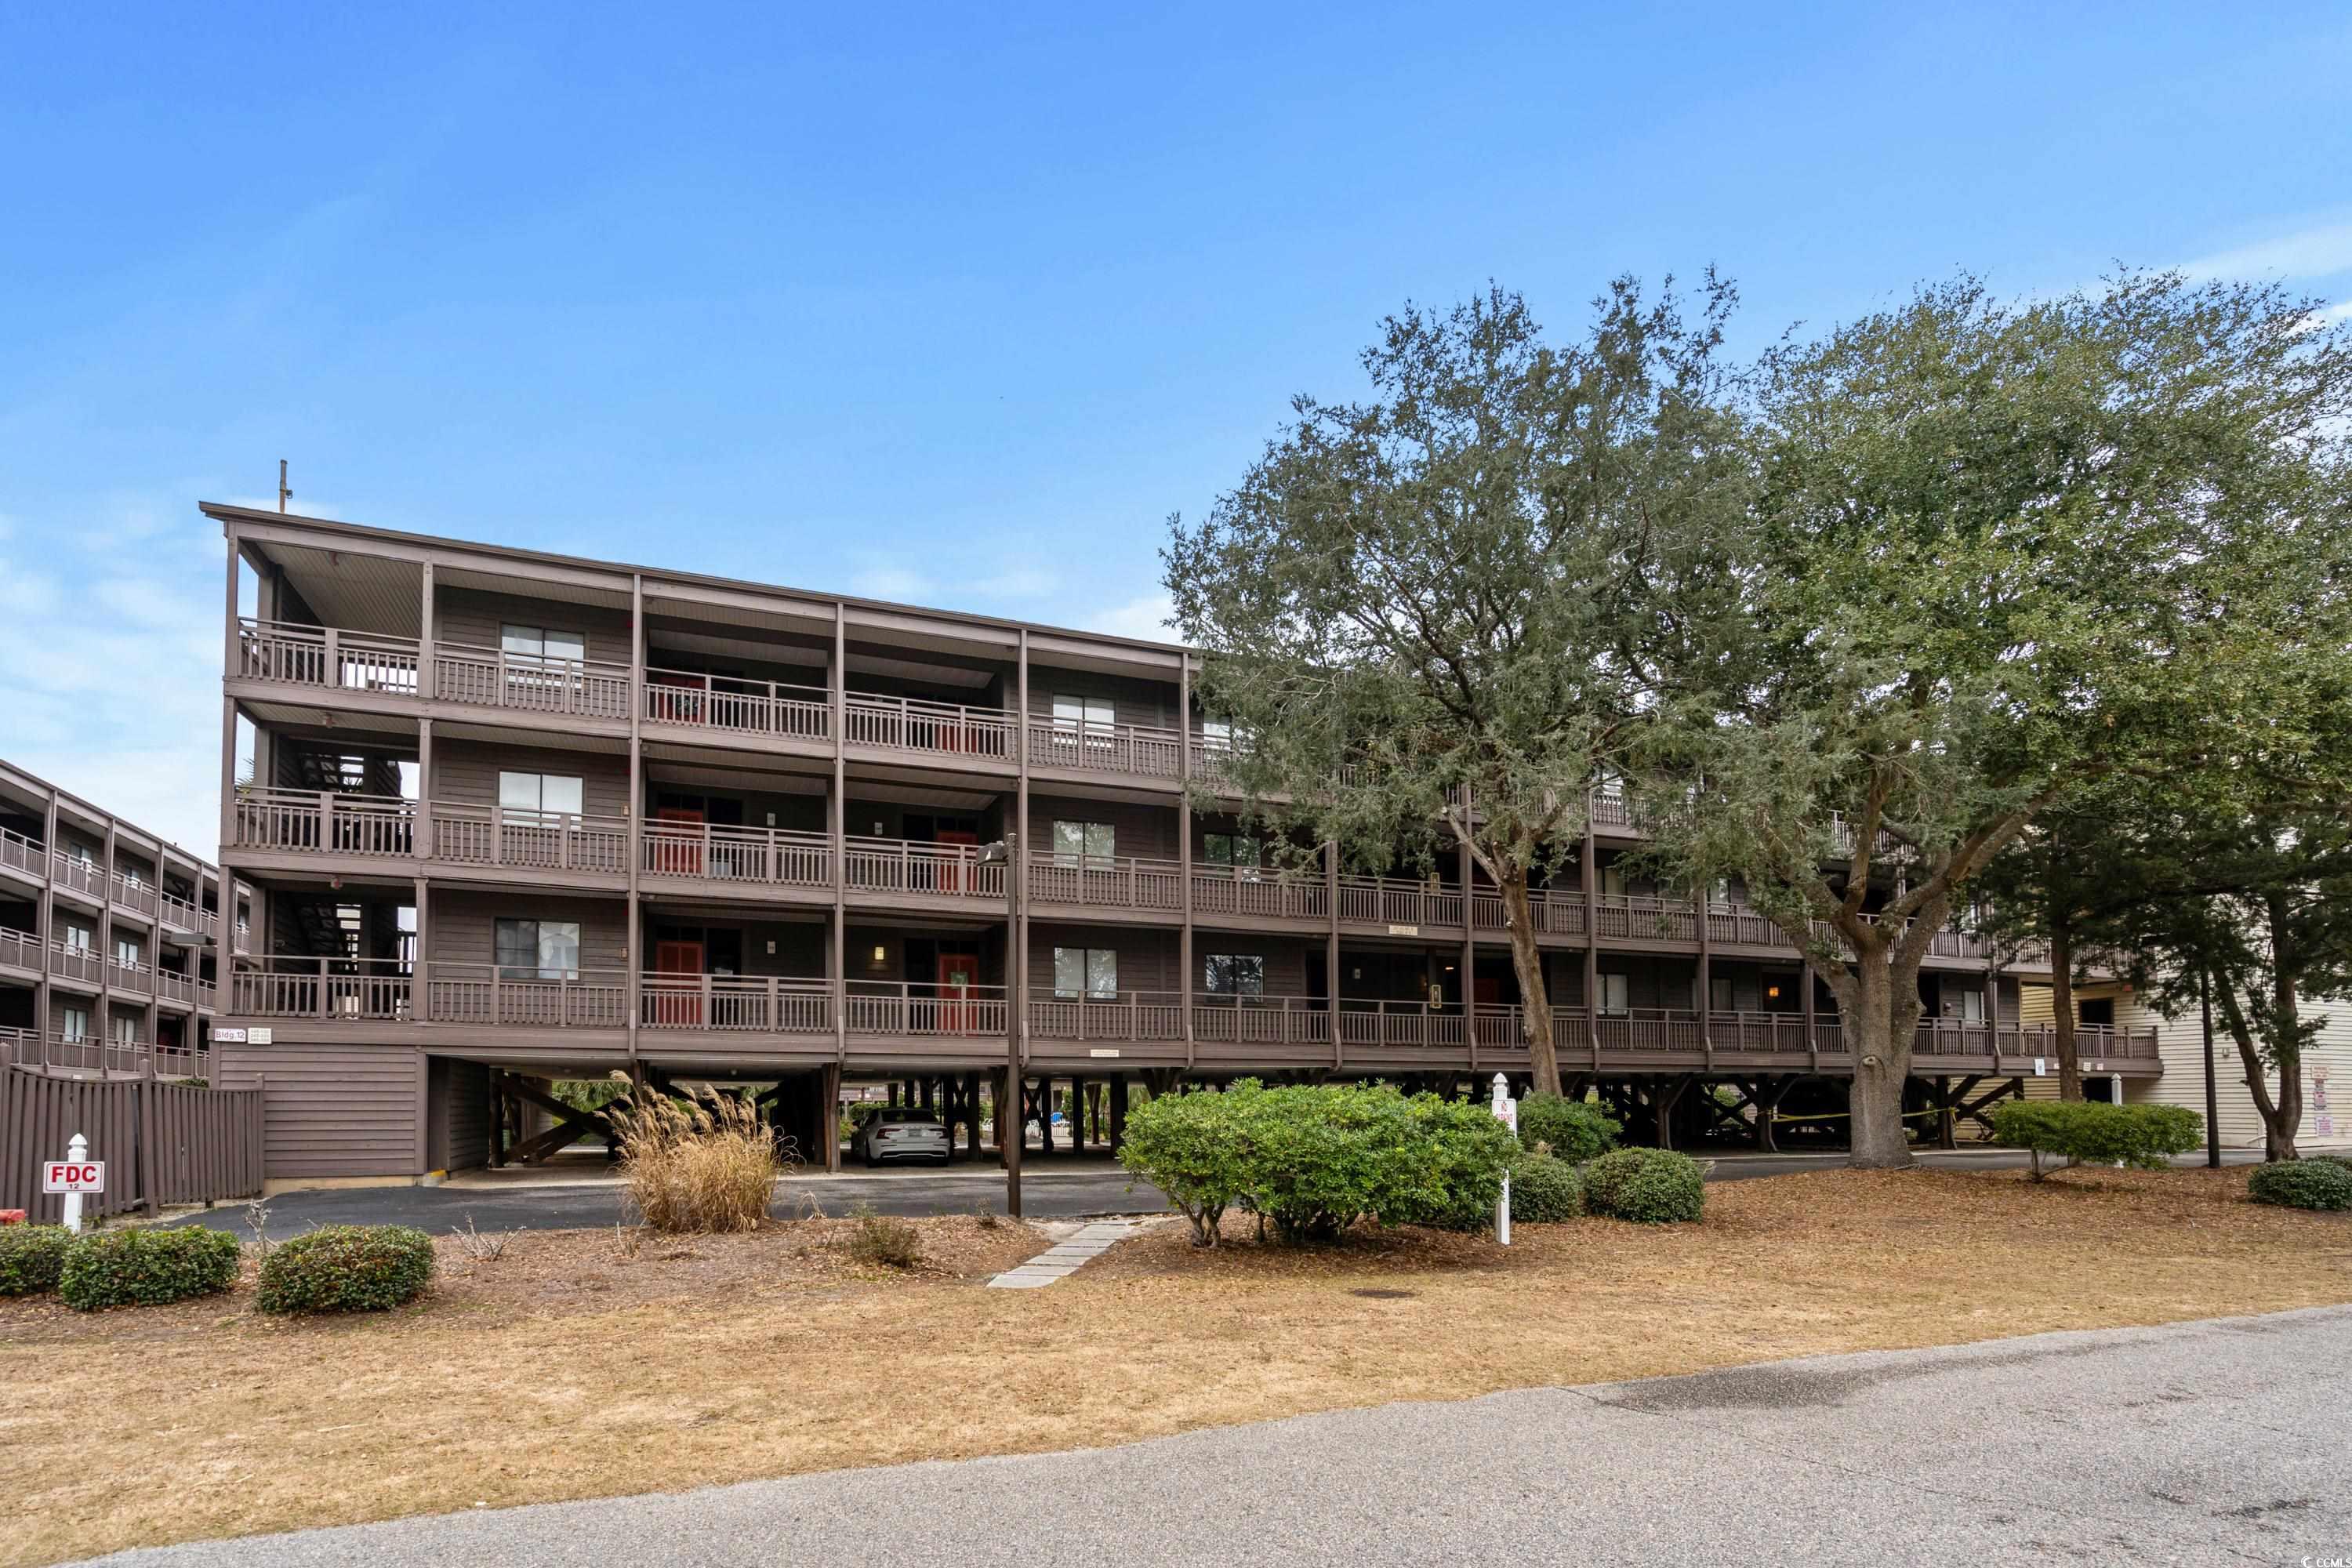 just steps from the beach and within walking distance to shops, restaurants, and live music on main st., is this first floor, 3 bedroom and 2.5 bath condo at the tilghman beach and racquet club resort. well maintained and never rented by current owners, this unit was fully remodeled in 2018 and the upgrades include granite countertops, stainless appliances (refrigerator replaced in 2022), wood plank tile flooring throughout, new raised vanities and toilets in all bathrooms, new tile in master bath shower and new tile in guest bath, new fixtures and hardware, new lighting, all doors and trim replaced throughout unit, and refaced cabinet doors in kitchen. also, the hvac was replaced inside and out. other stand out features: the standard hall wet bar has been converted to a full size closet so this unit has more storage than most, water heater was replaced in 2019, and the screened in porch, which overlooks one of the two resort pools and tennis courts, was fully reconstructed and refurnished in 2021. an electronic door lock is installed, and there is a 110-outlet wired at the ac unit for golf cart charging. a separate laundry/storage closet is located at the entry way. other amenities include elevators and luggage carts for each building, under building parking, and ample overflow parking. one of the two pools is oceanside, both pool decks have been recently rebuilt, and the courts are lined for pickle ball.  don’t miss your opportunity to see this gorgeous condo which is being offered with all the furniture so you can move right in!